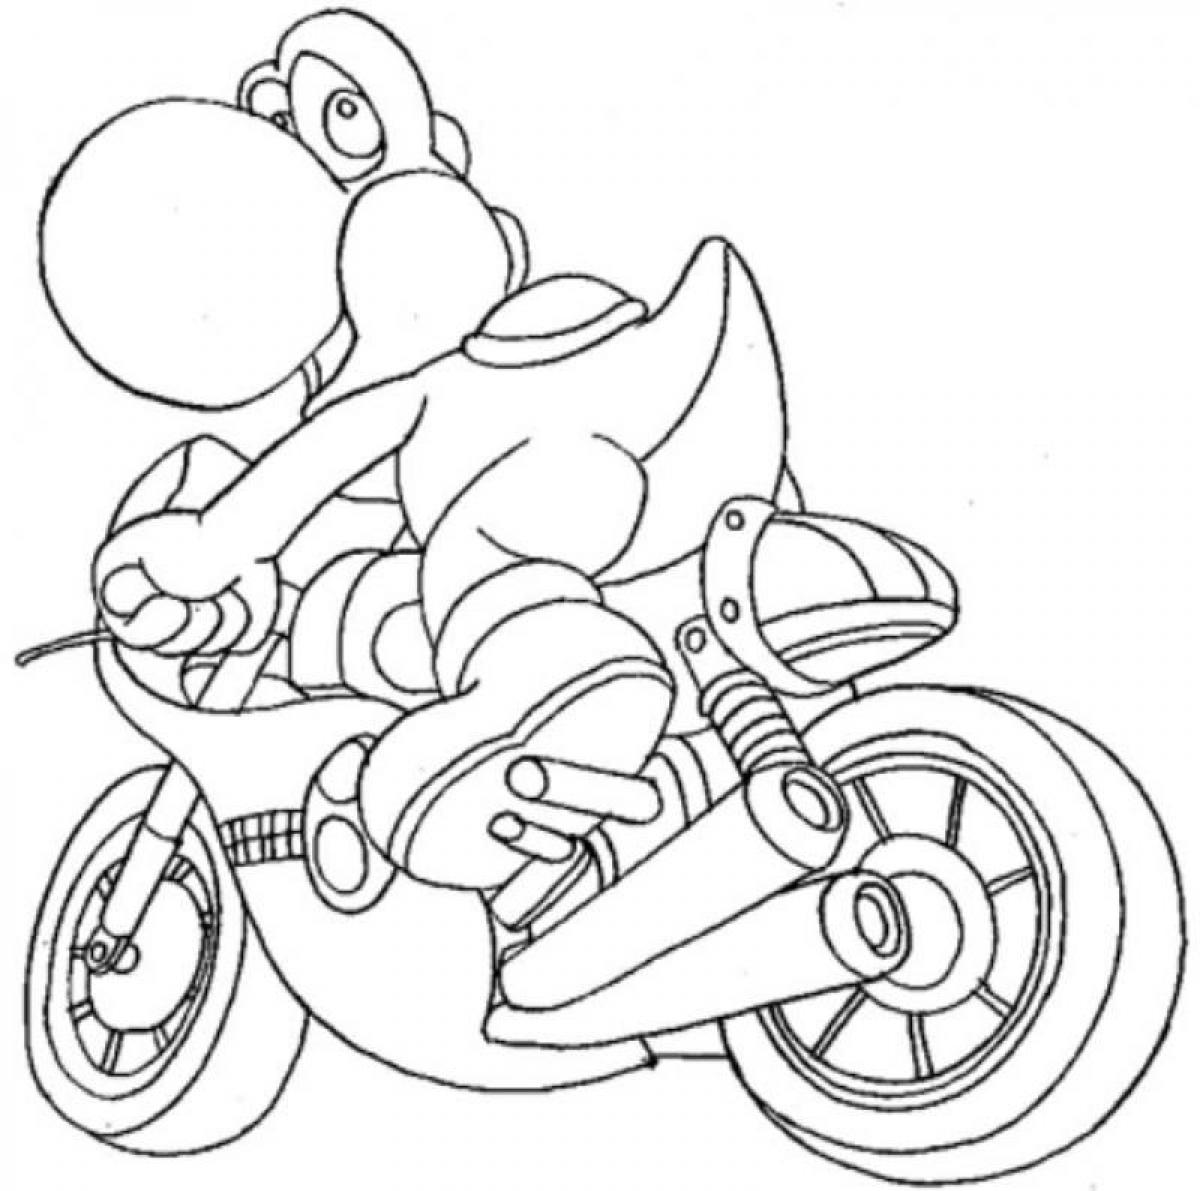 Yoshi coloring pages to download and print for free